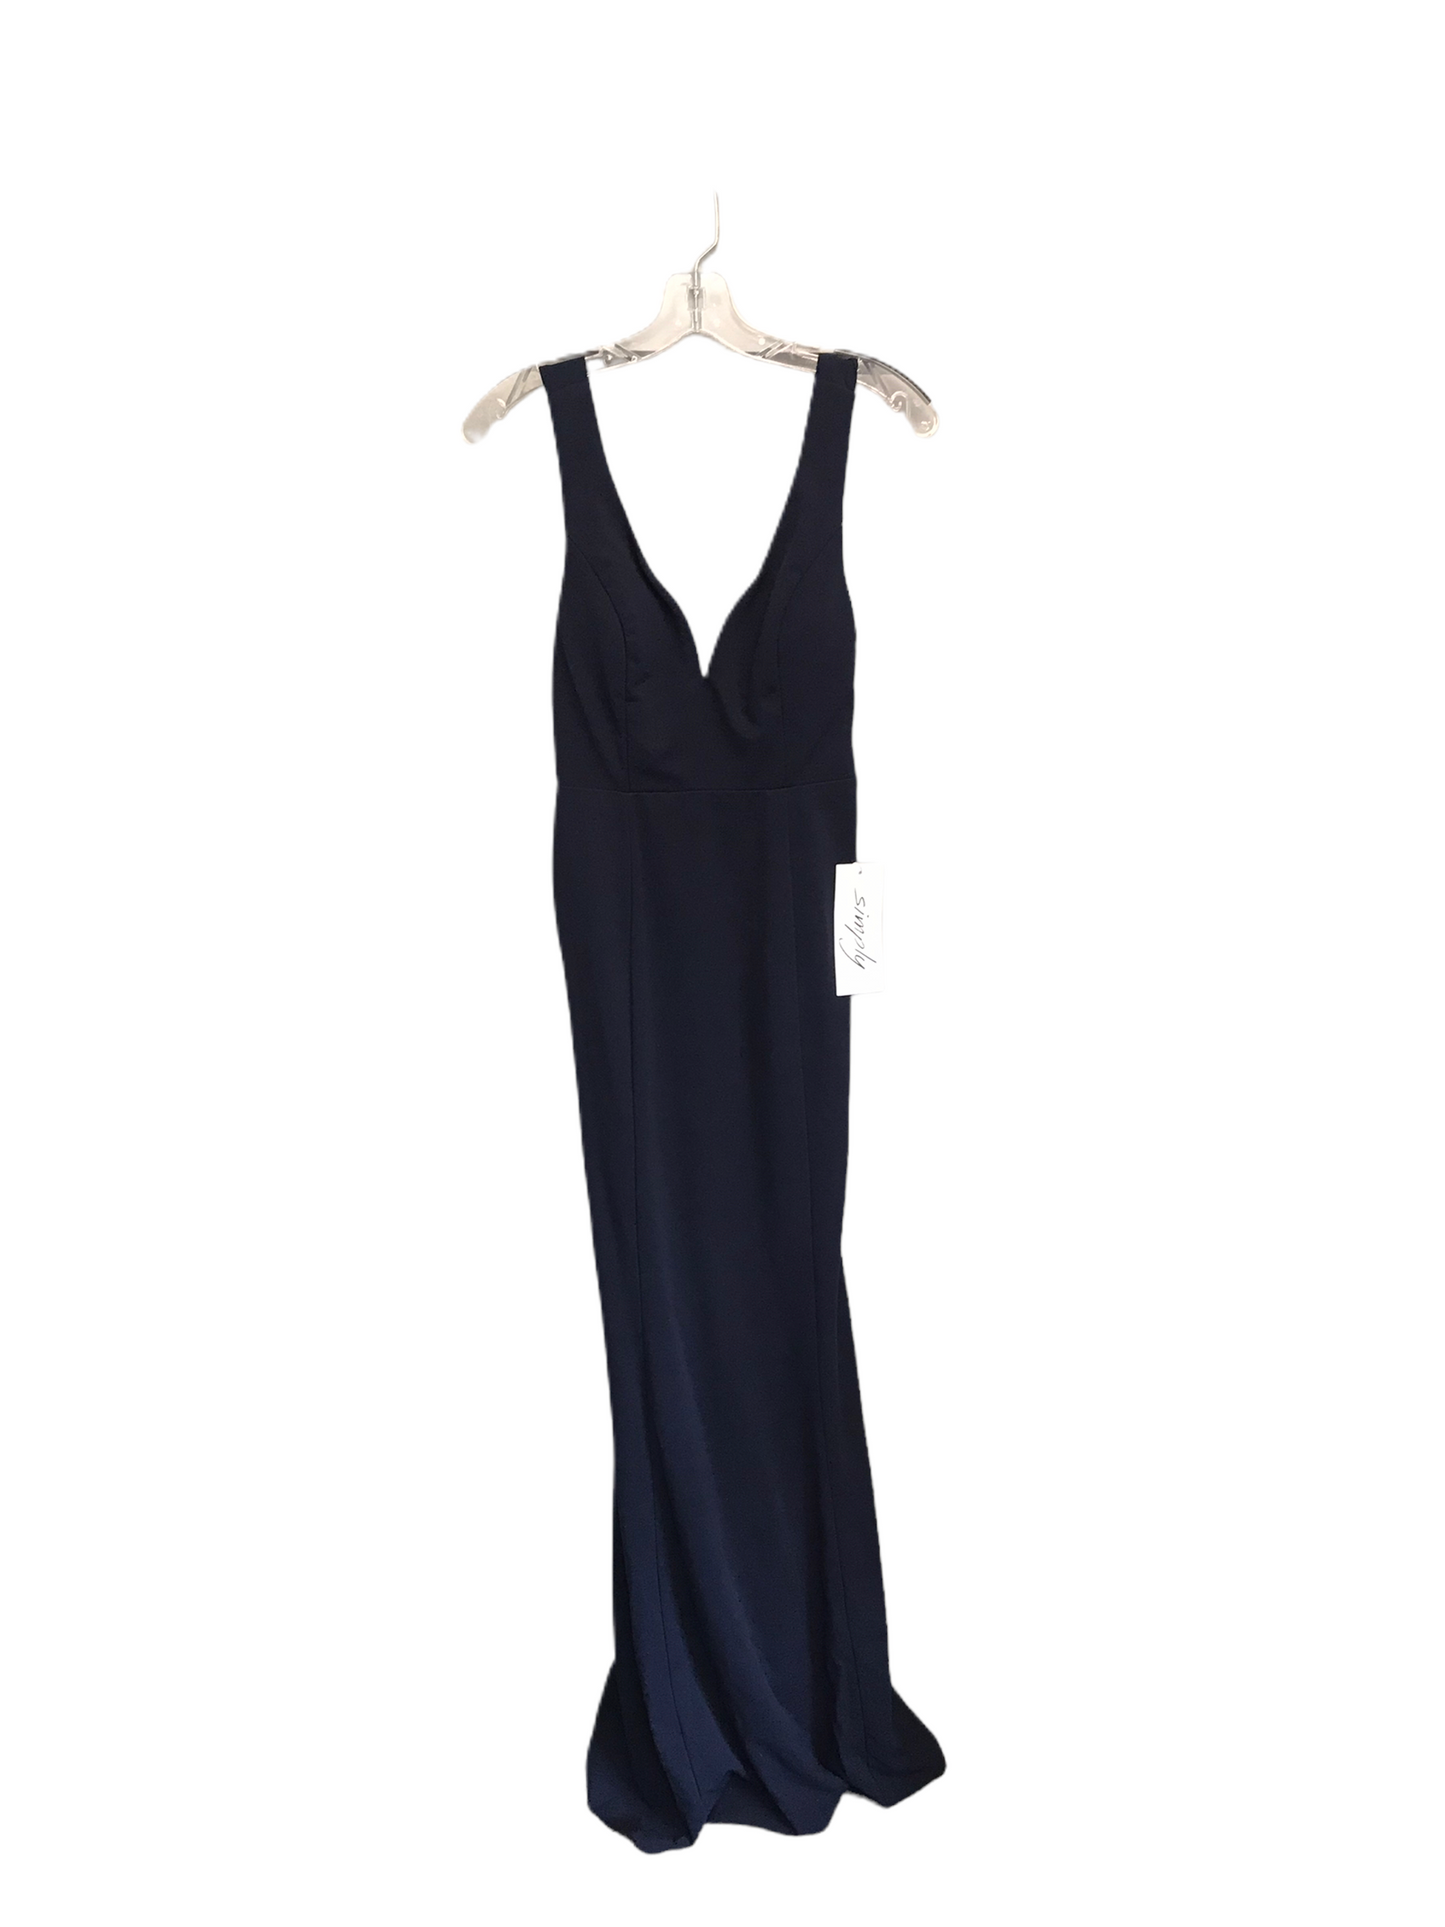 Navy Dress Party Long By Simply Size: M